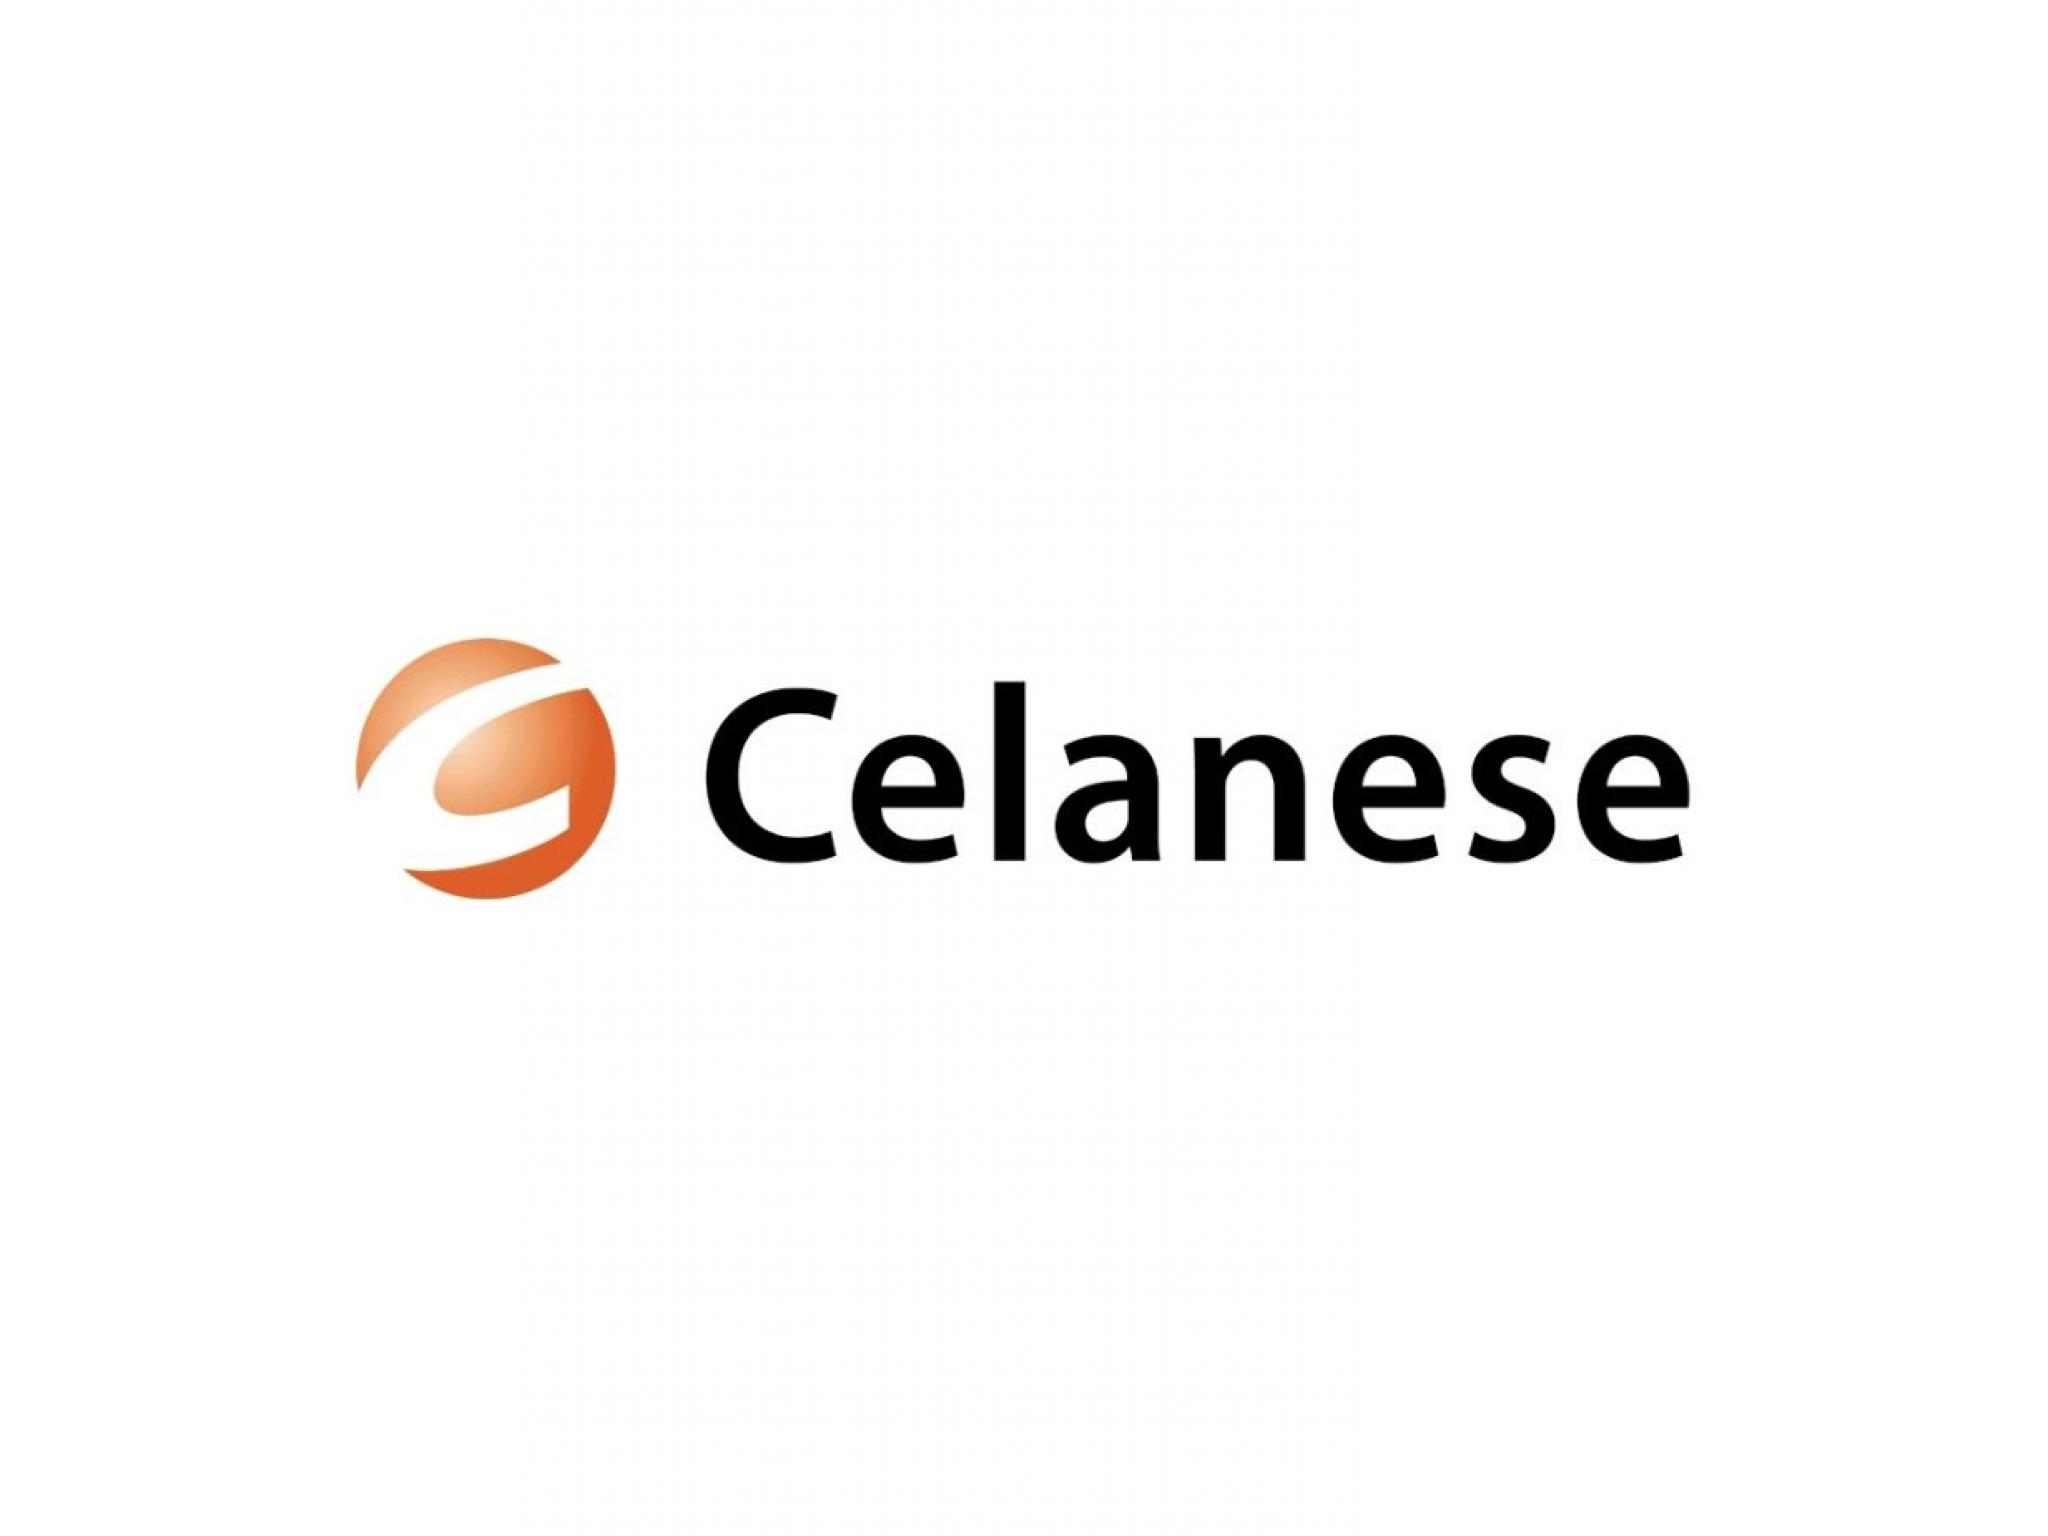  celanese-upgrade-reflects-progress-as-debt-overhang-is-poised-to-wane-analyst 